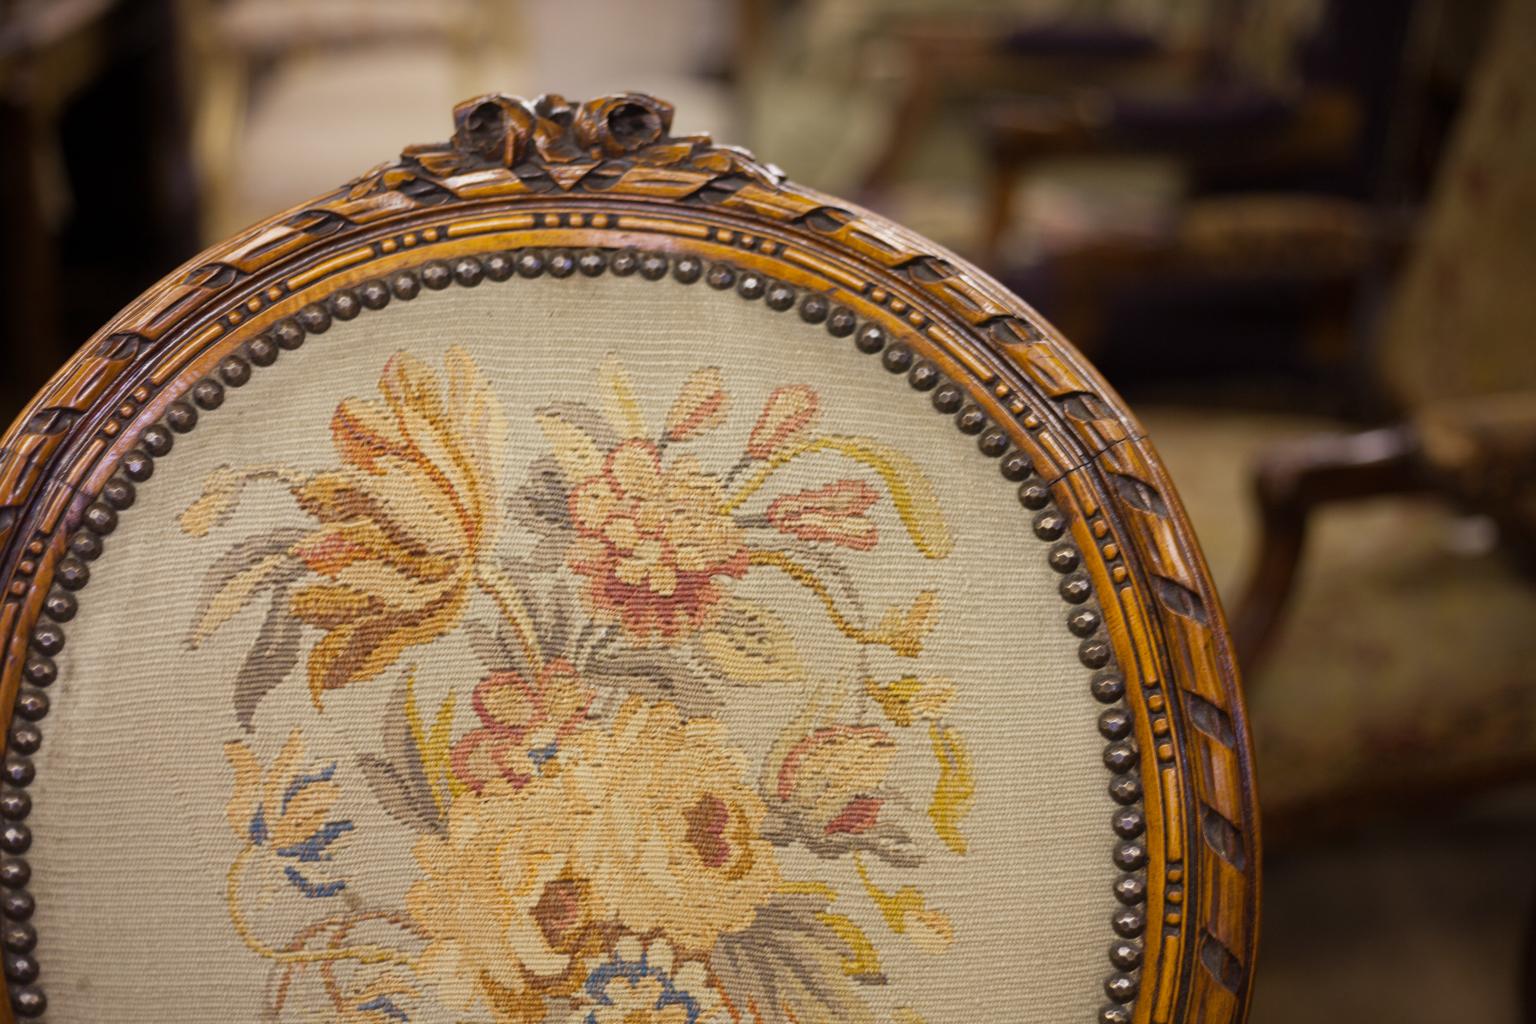 French Aubusson tapestry armchair, with faceted brass stud work surrounding the tapestries, handsomely carved scroll work and floral crest. It has cabriole legs and fluted acanthus carved arms and arm supports.